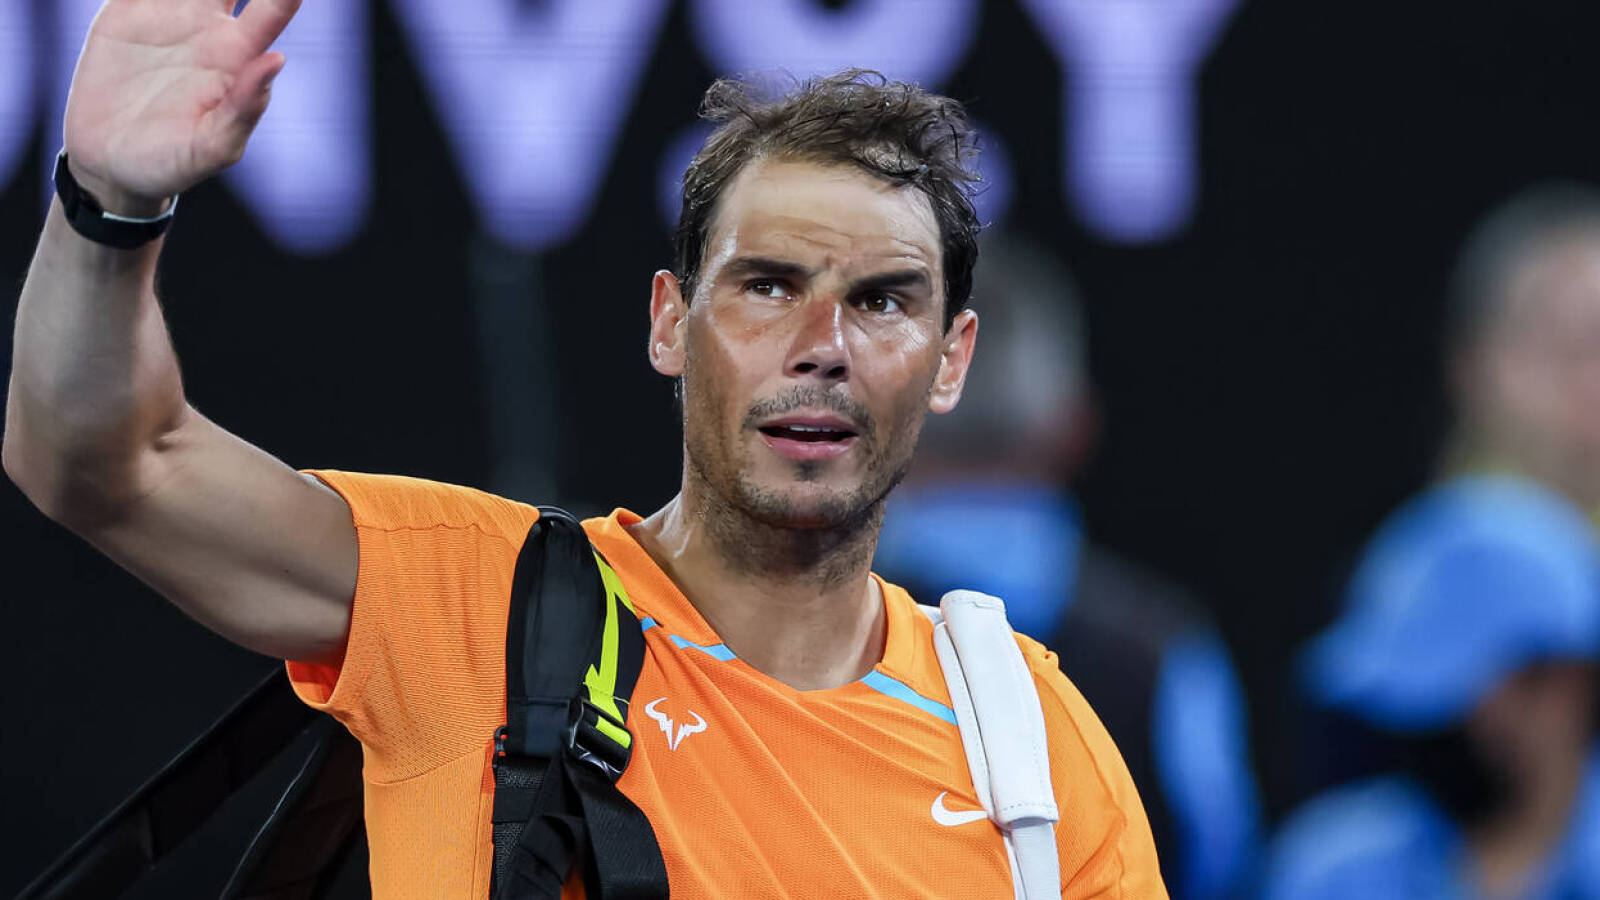 Rafael Nadal switches gears, gives major update on French Open status